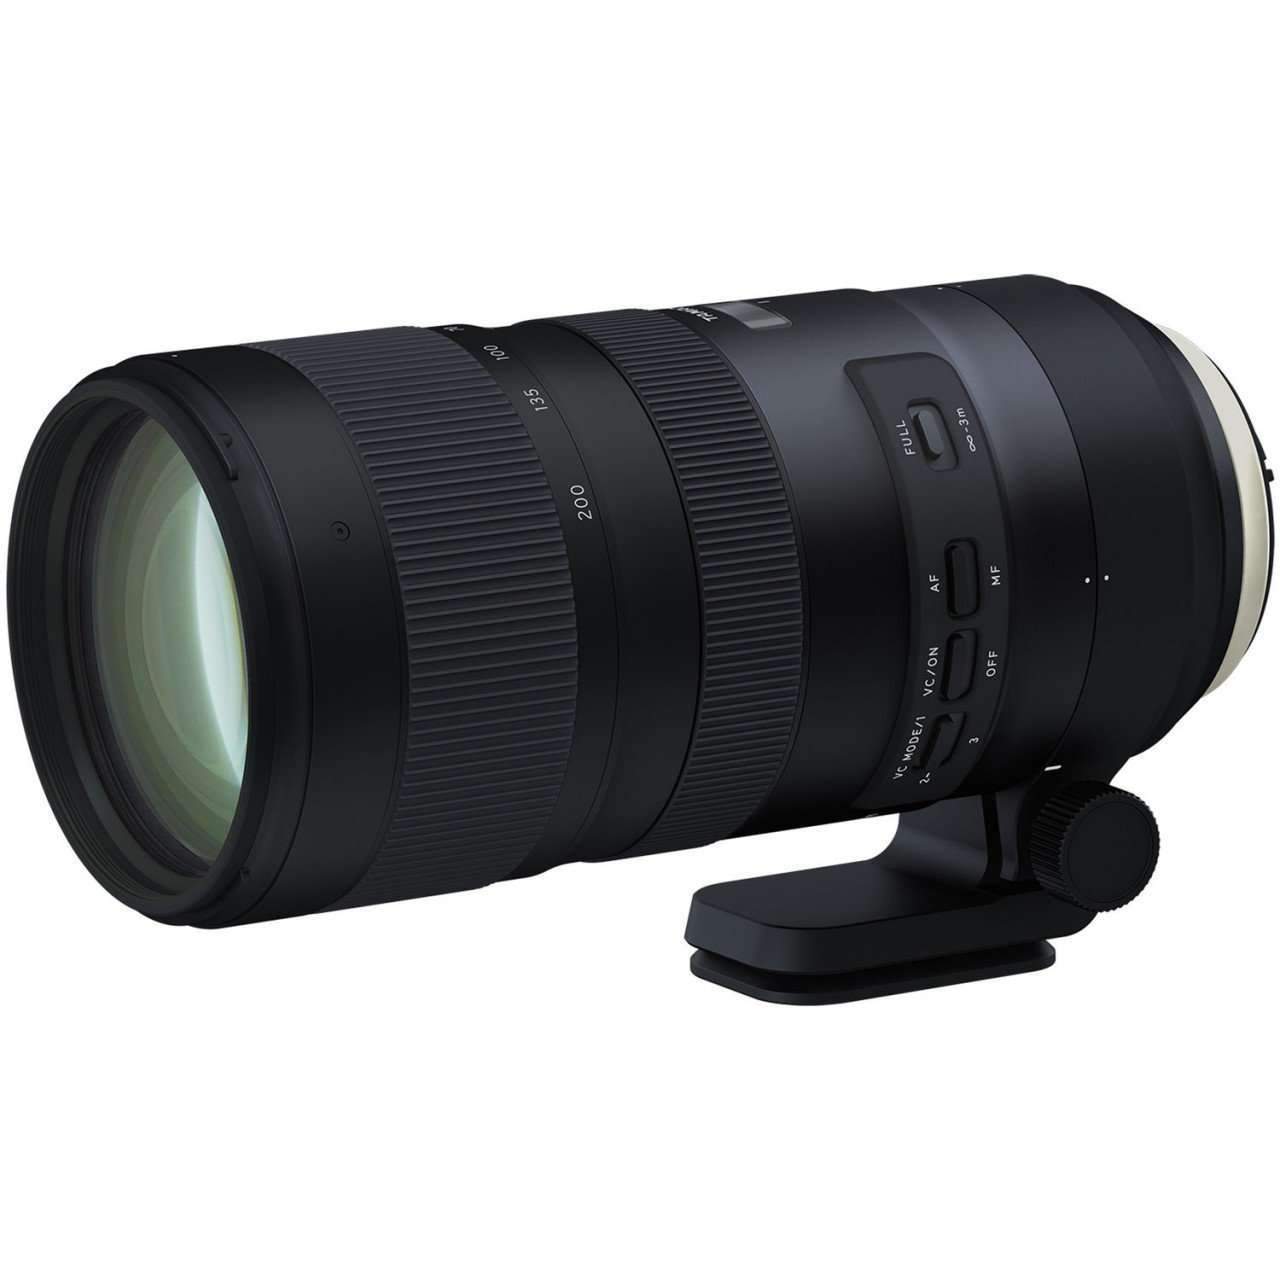 Tamron SP 70-200mm f/2.8 Di VC USD G2 Lens for Canon EF Mount Tamron Lens - DSLR Zoom